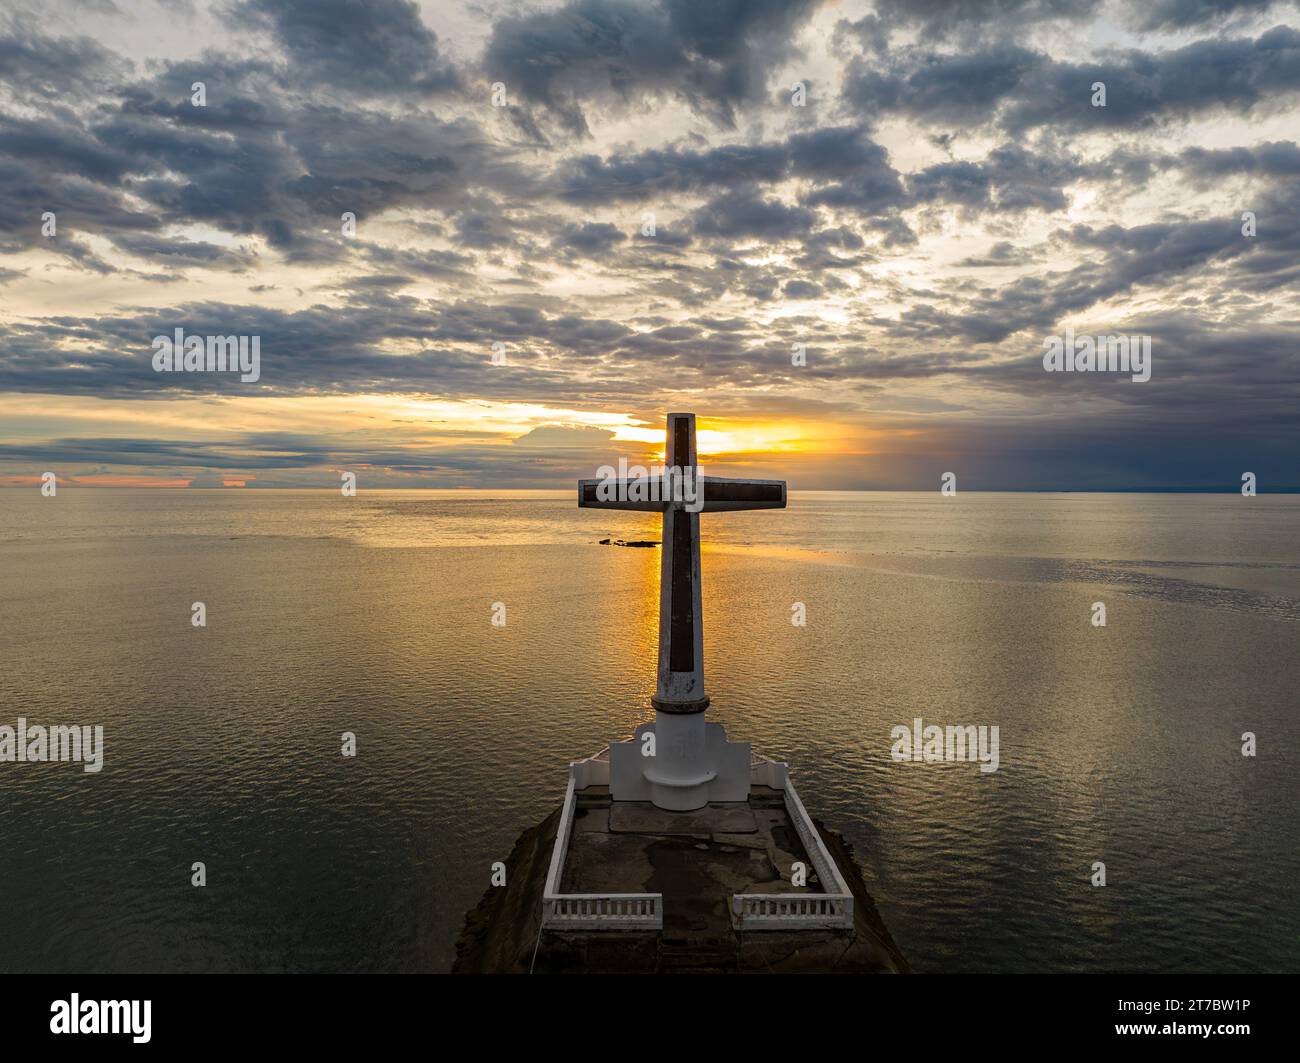 Sunken Cemetery in Camiguin Island. Cloudscape with sunset background. Philippines. Stock Photo